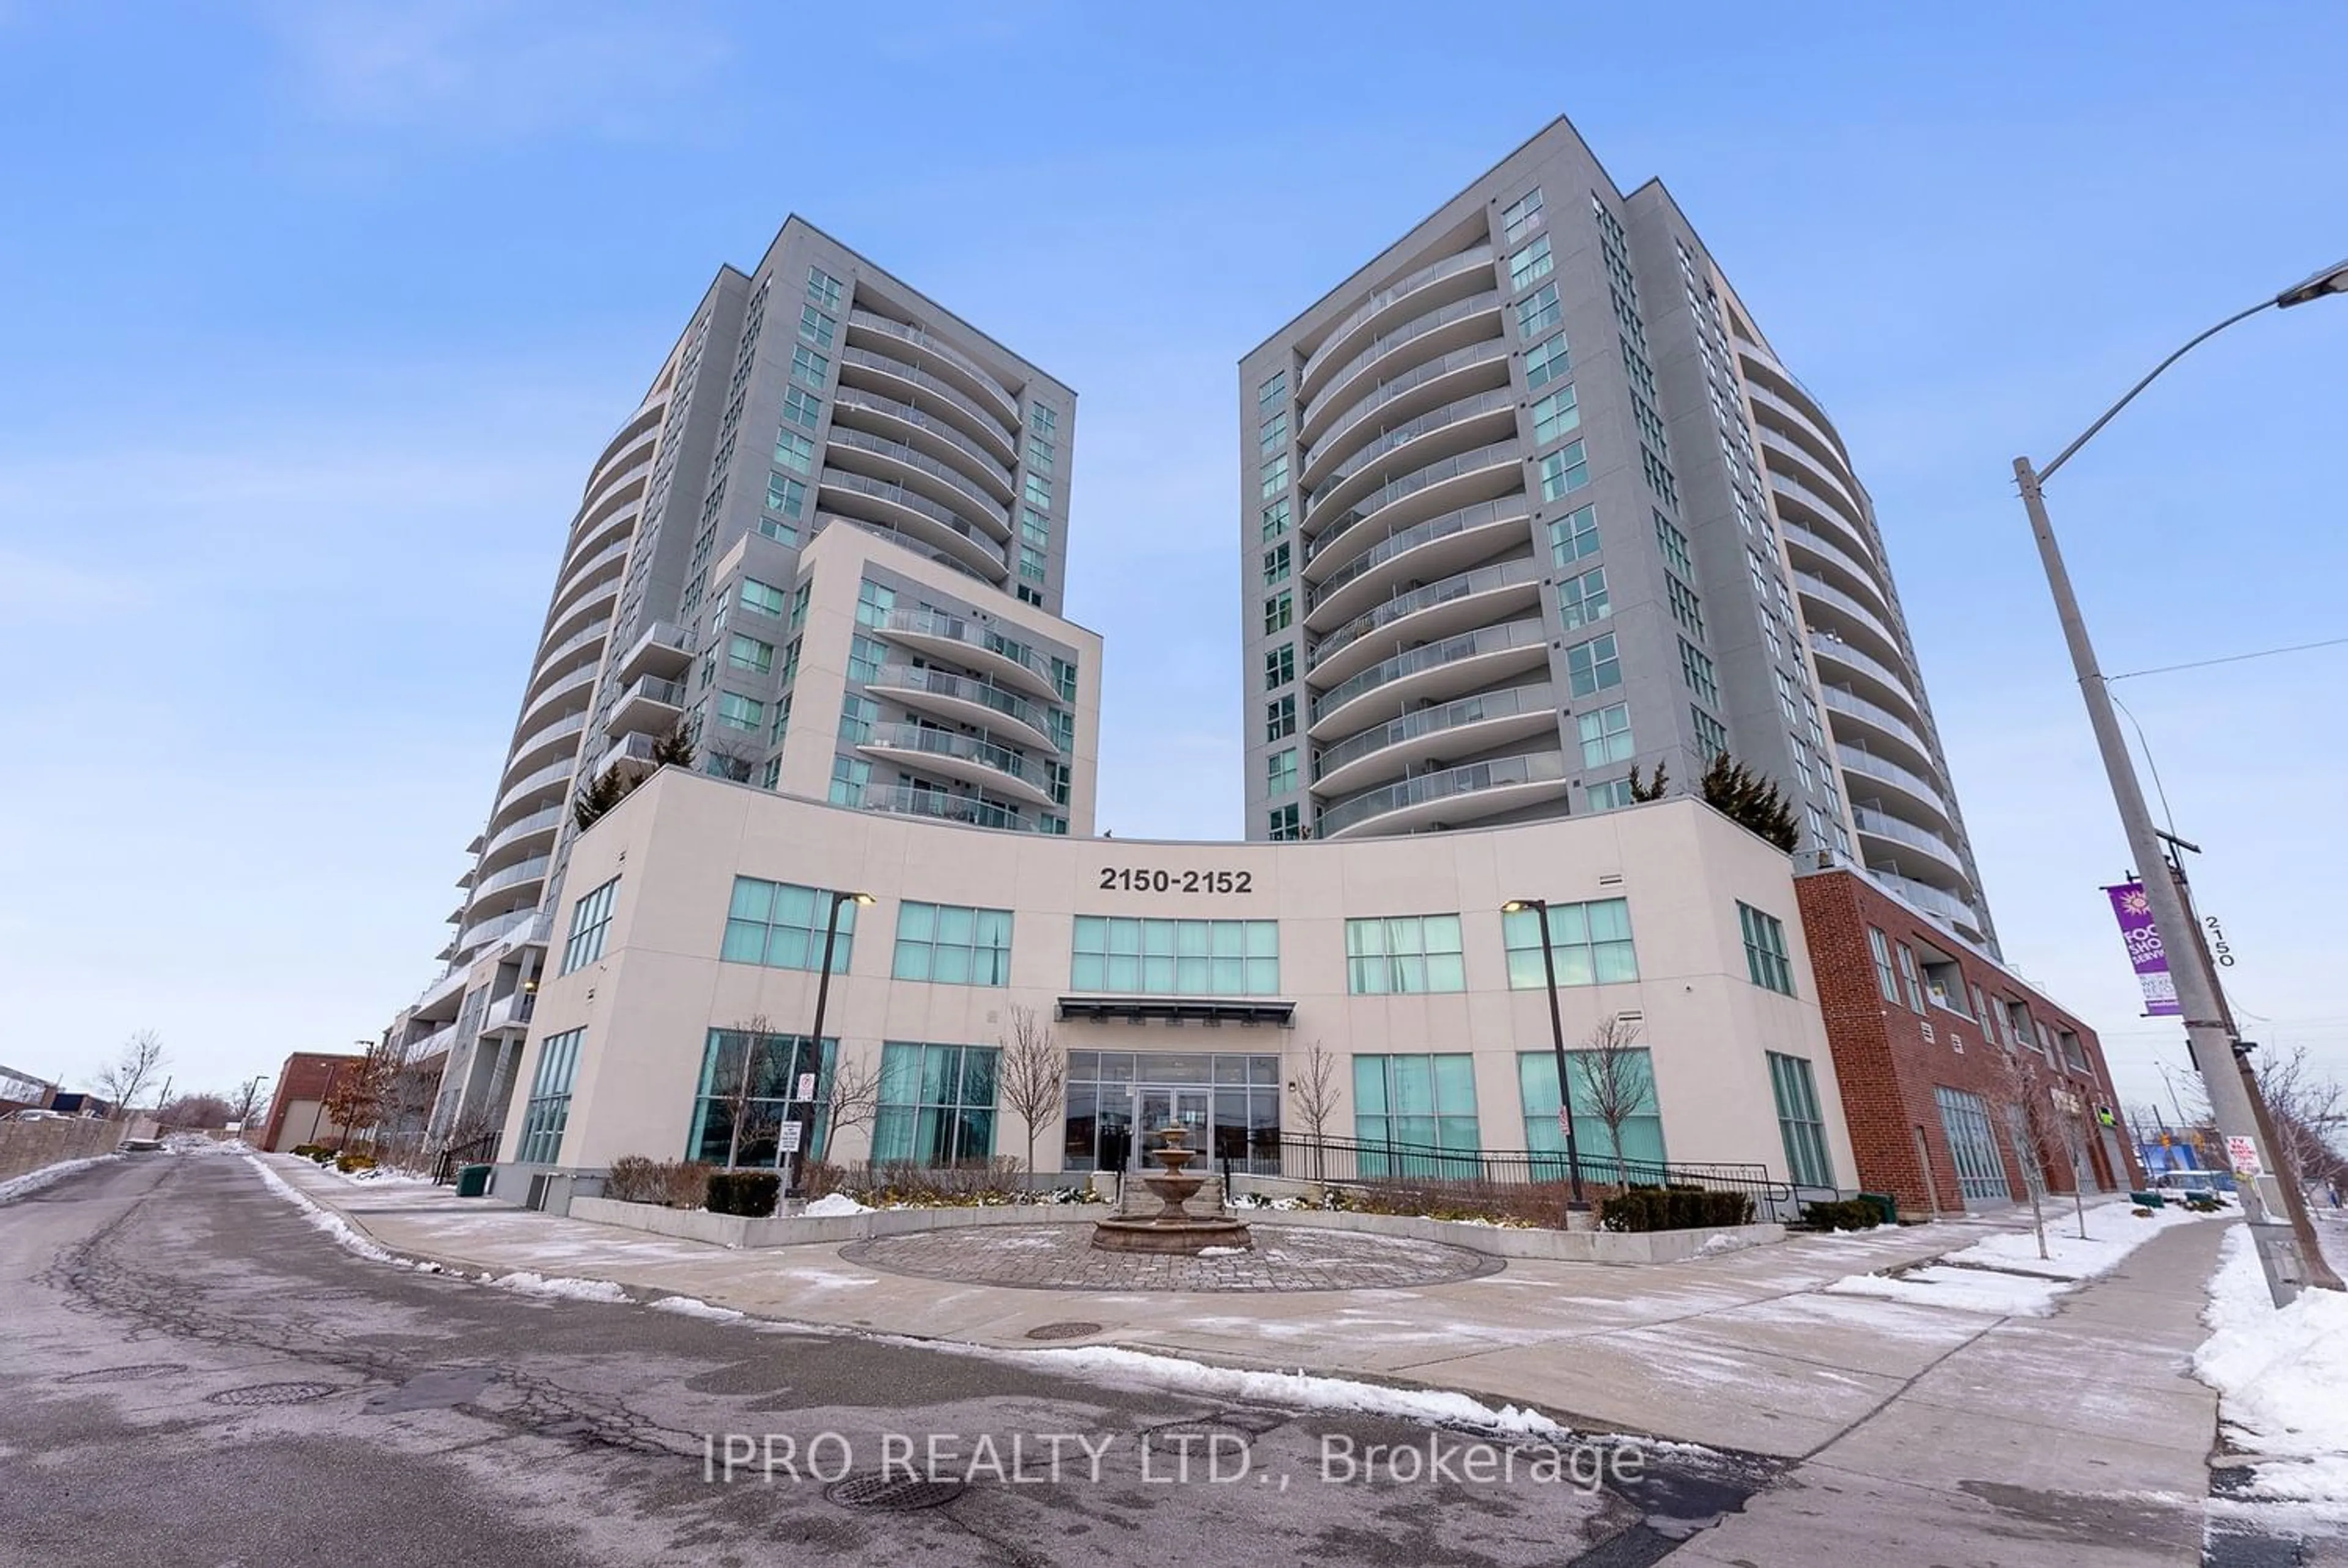 A pic from exterior of the house or condo for 2150 Lawrence Ave #1609, Toronto Ontario M1R 3A7